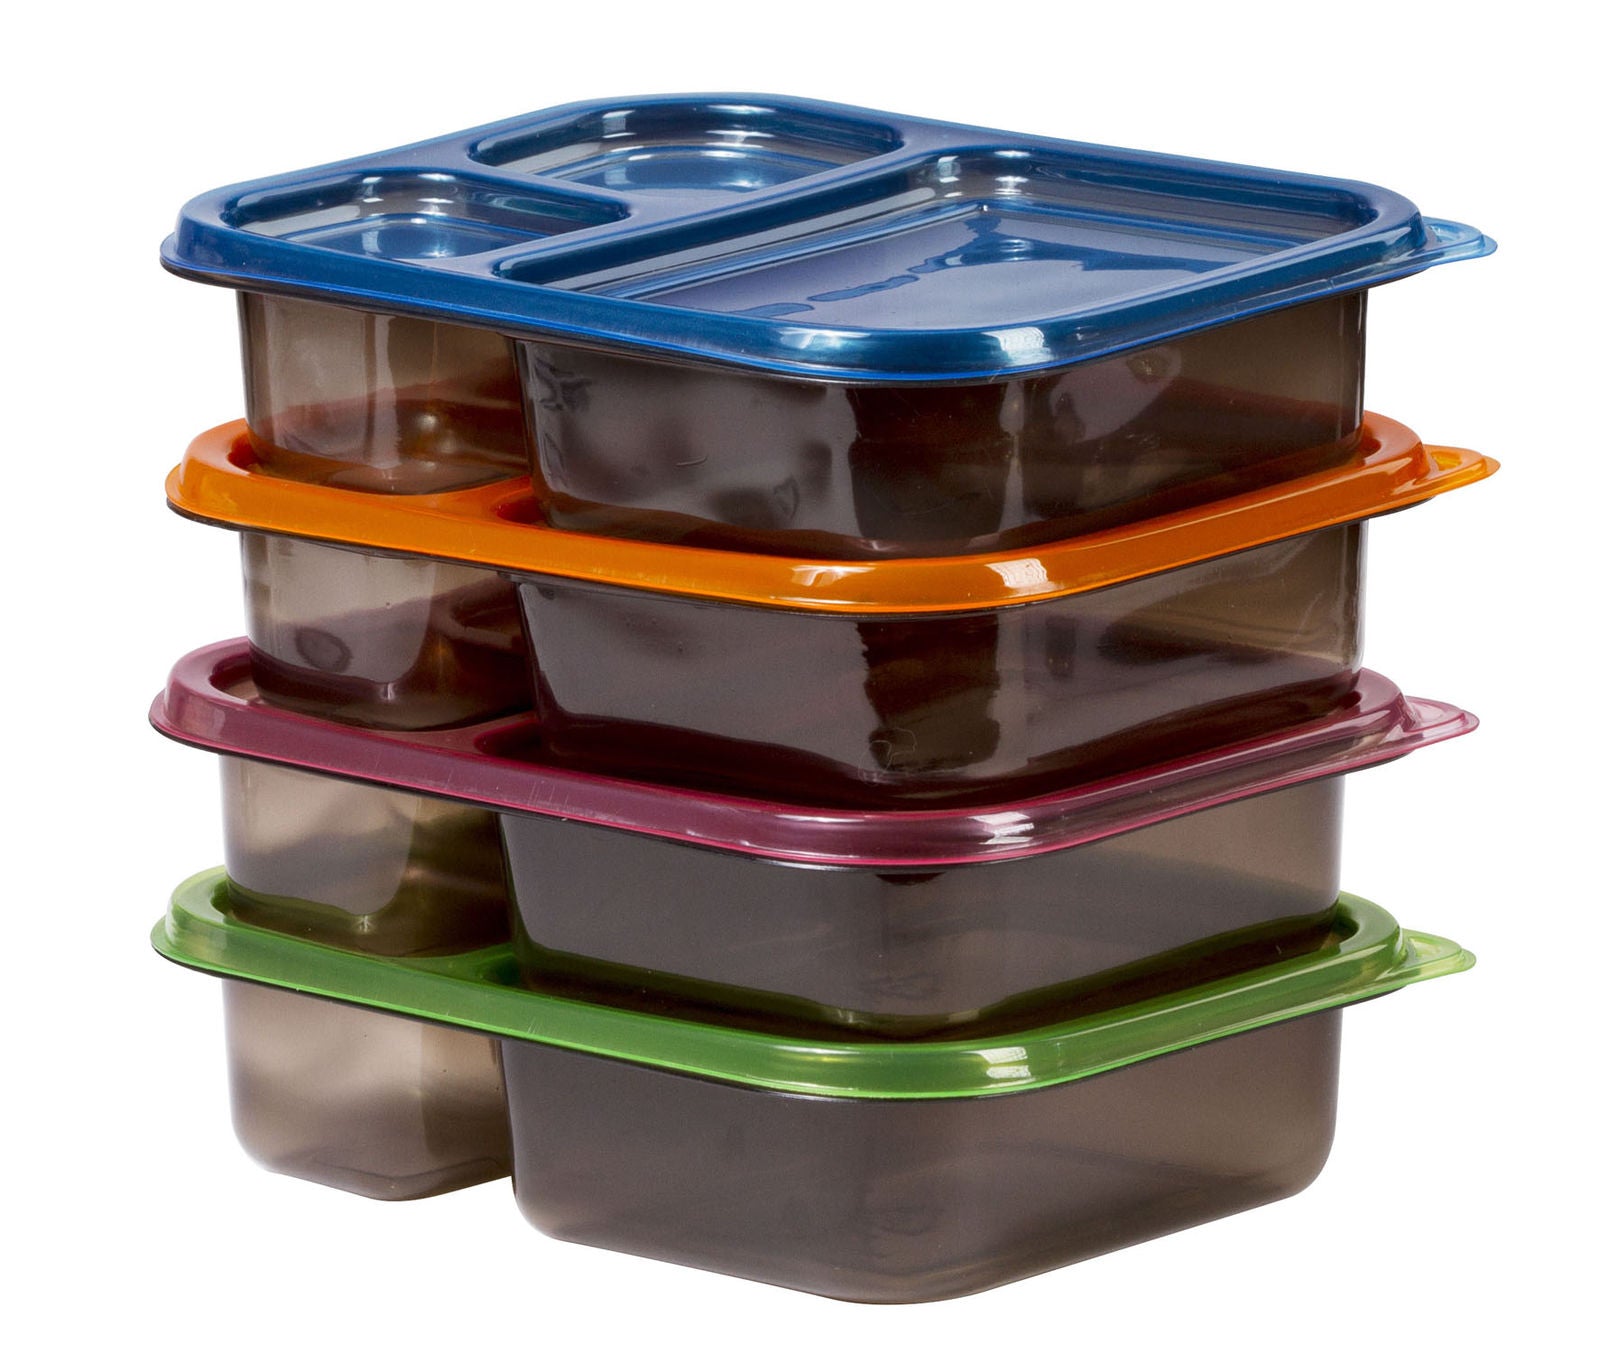 8 Pc Meal Containers Adult Lunch Boxes - 3 Compartment Lunch Containers (Multi Color Lids) - Microwave Safe Containers